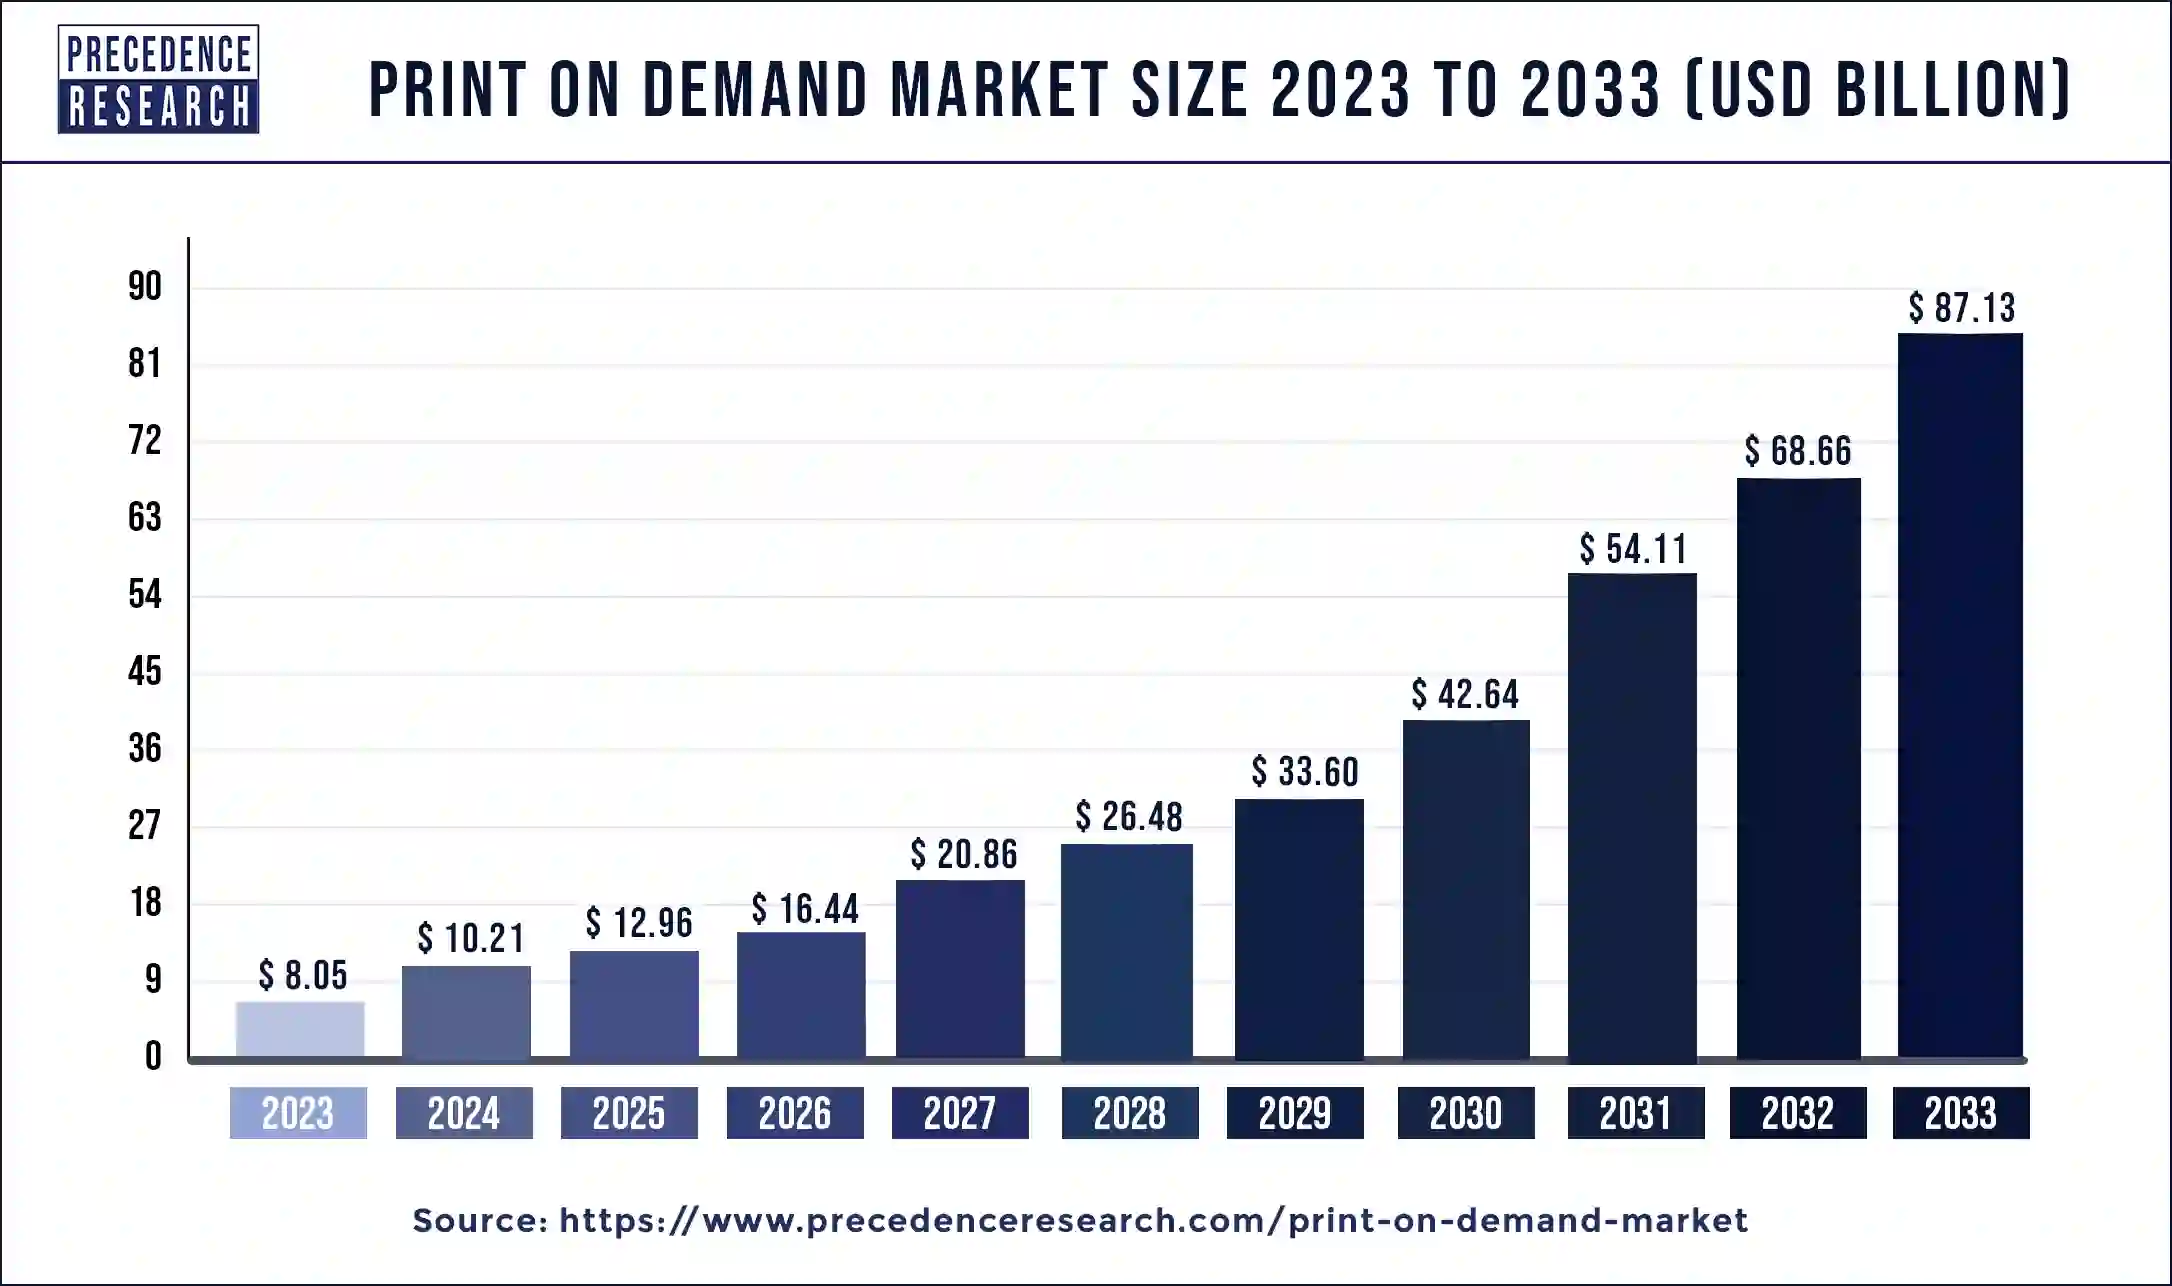 Print on Demand Market Size 2024 to 2033